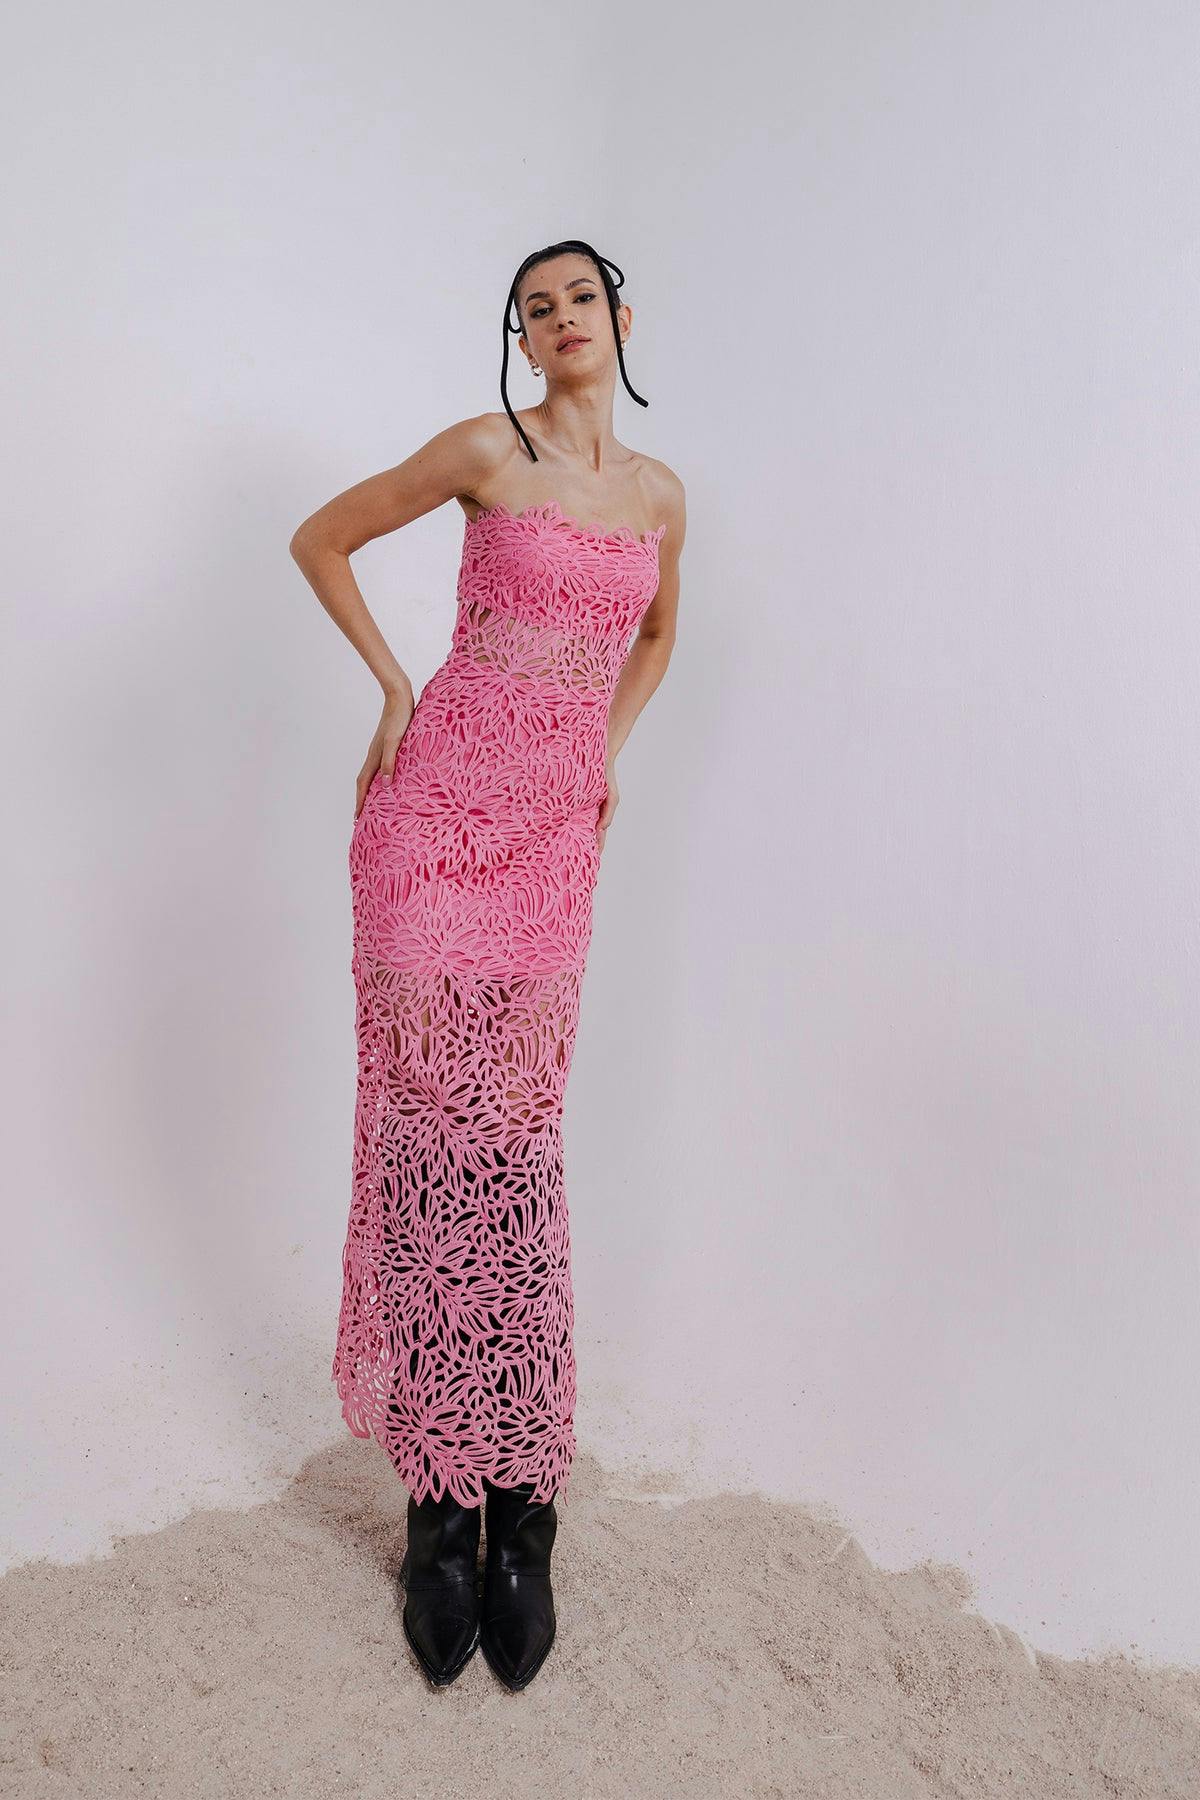 PURR PINK STRAPPY SHEATH DRESS, a product by July Issue